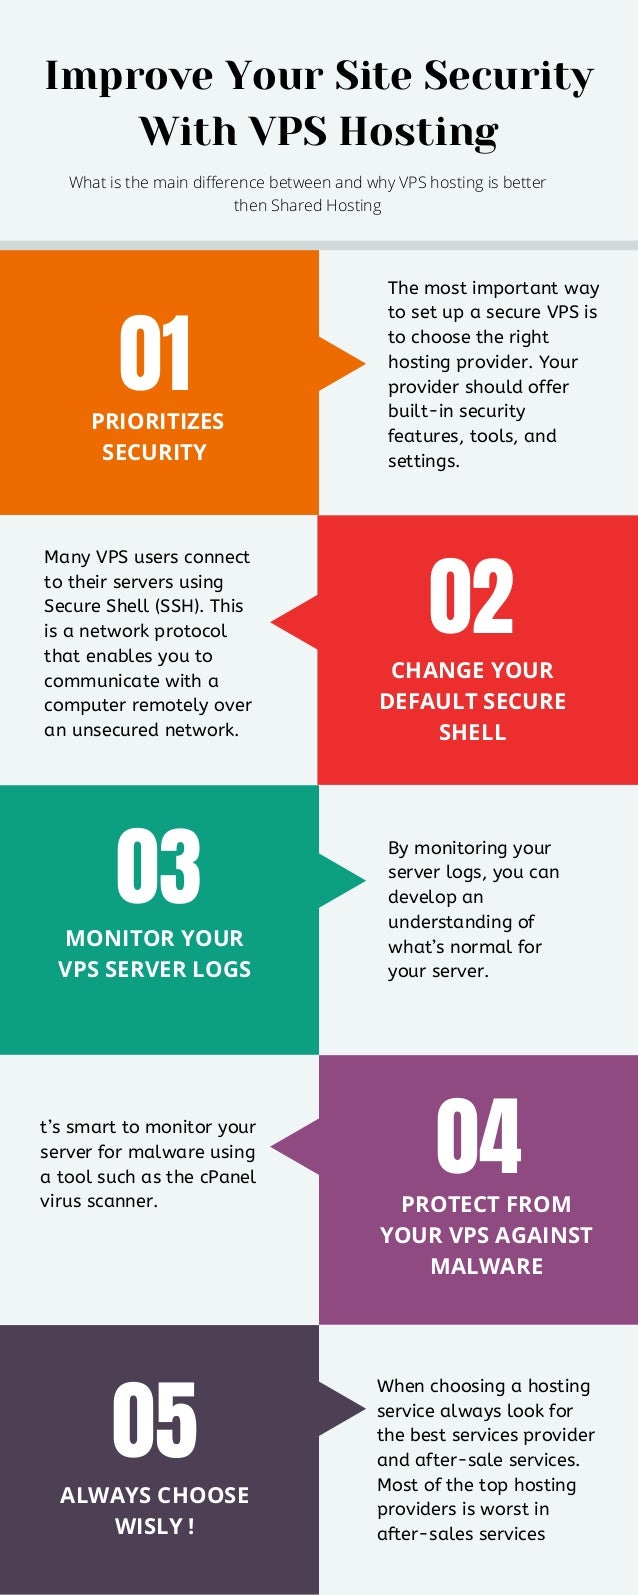 Improve Your Site Security
With VPS Hosting
01
02
03
04
05
The most important way
to set up a secure VPS is
to choose the right
hosting provider. Your
provider should offer
built-in security
features, tools, and
settings.
Many VPS users connect
to their servers using
Secure Shell (SSH). This
is a network protocol
that enables you to
communicate with a
computer remotely over
an unsecured network.
By monitoring your
server logs, you can
develop an
understanding of
what’s normal for
your server.
t’s smart to monitor your
server for malware using
a tool such as the cPanel
virus scanner.
When choosing a hosting
service always look for
the best services provider
and after-sale services.
Most of the top hosting
providers is worst in
after-sales services
PRIORITIZES
SECURITY
CHANGE YOUR
DEFAULT SECURE
SHELL
MONITOR YOUR
VPS SERVER LOGS
PROTECT FROM
YOUR VPS AGAINST
MALWARE
ALWAYS CHOOSE
WISLY !
What is the main difference between and why VPS hosting is better
then Shared Hosting
 